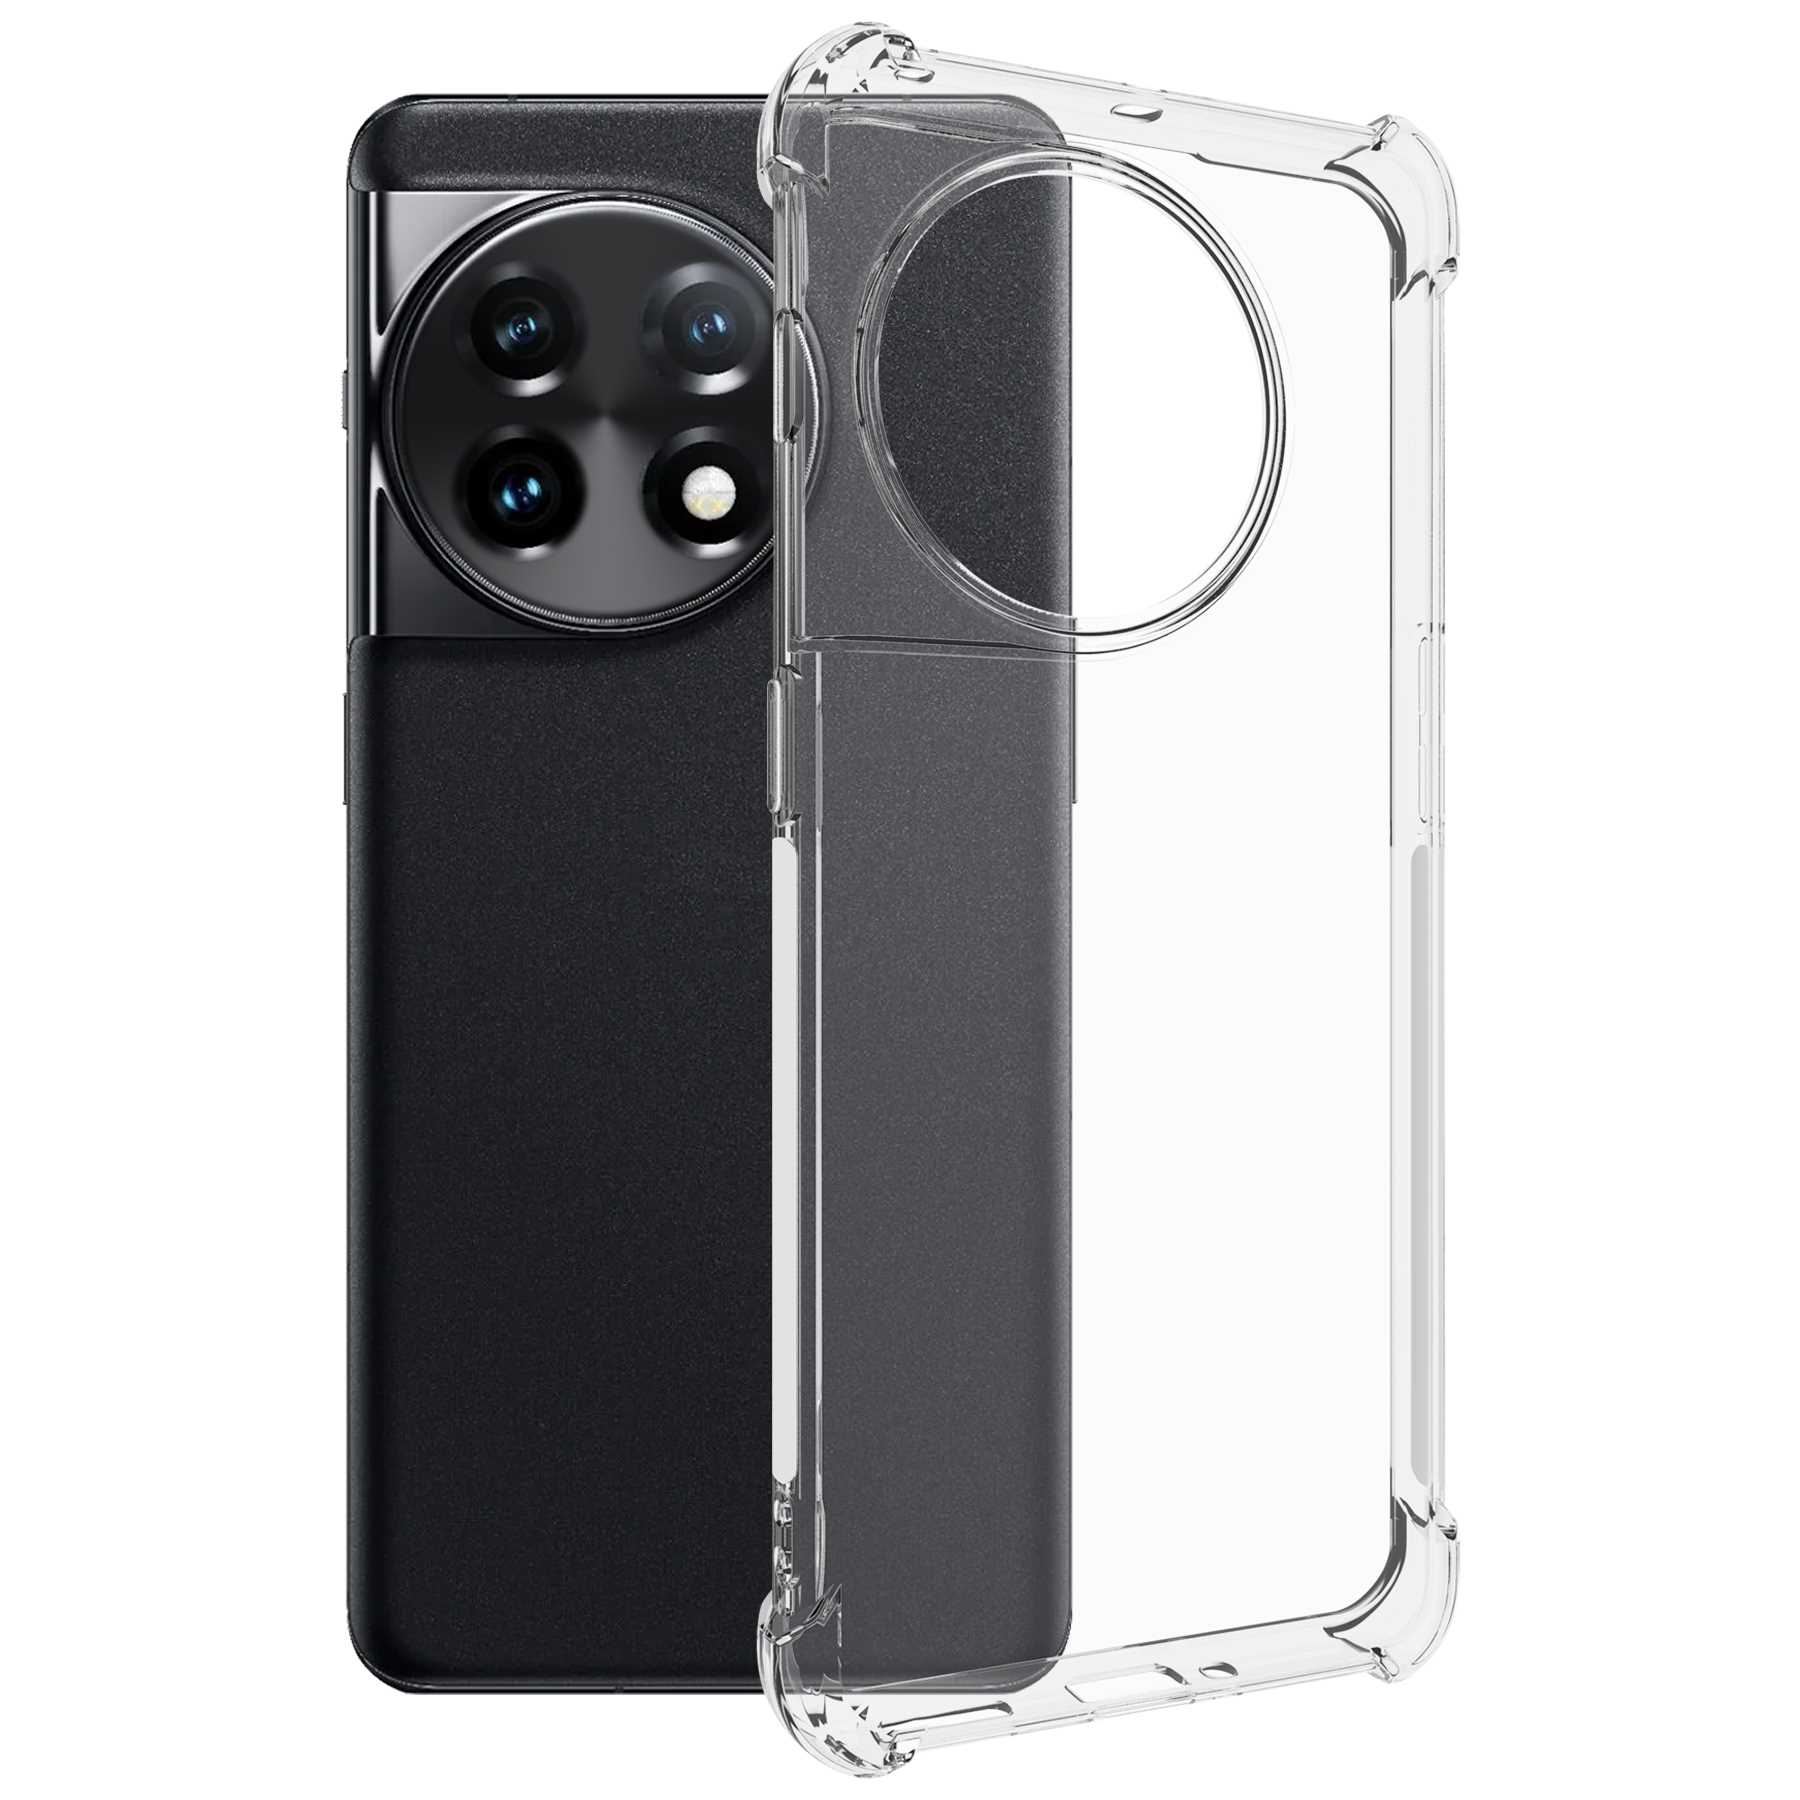 MTB MORE ENERGY Case, 11, Transparent Clear Backcover, OnePlus, Armor